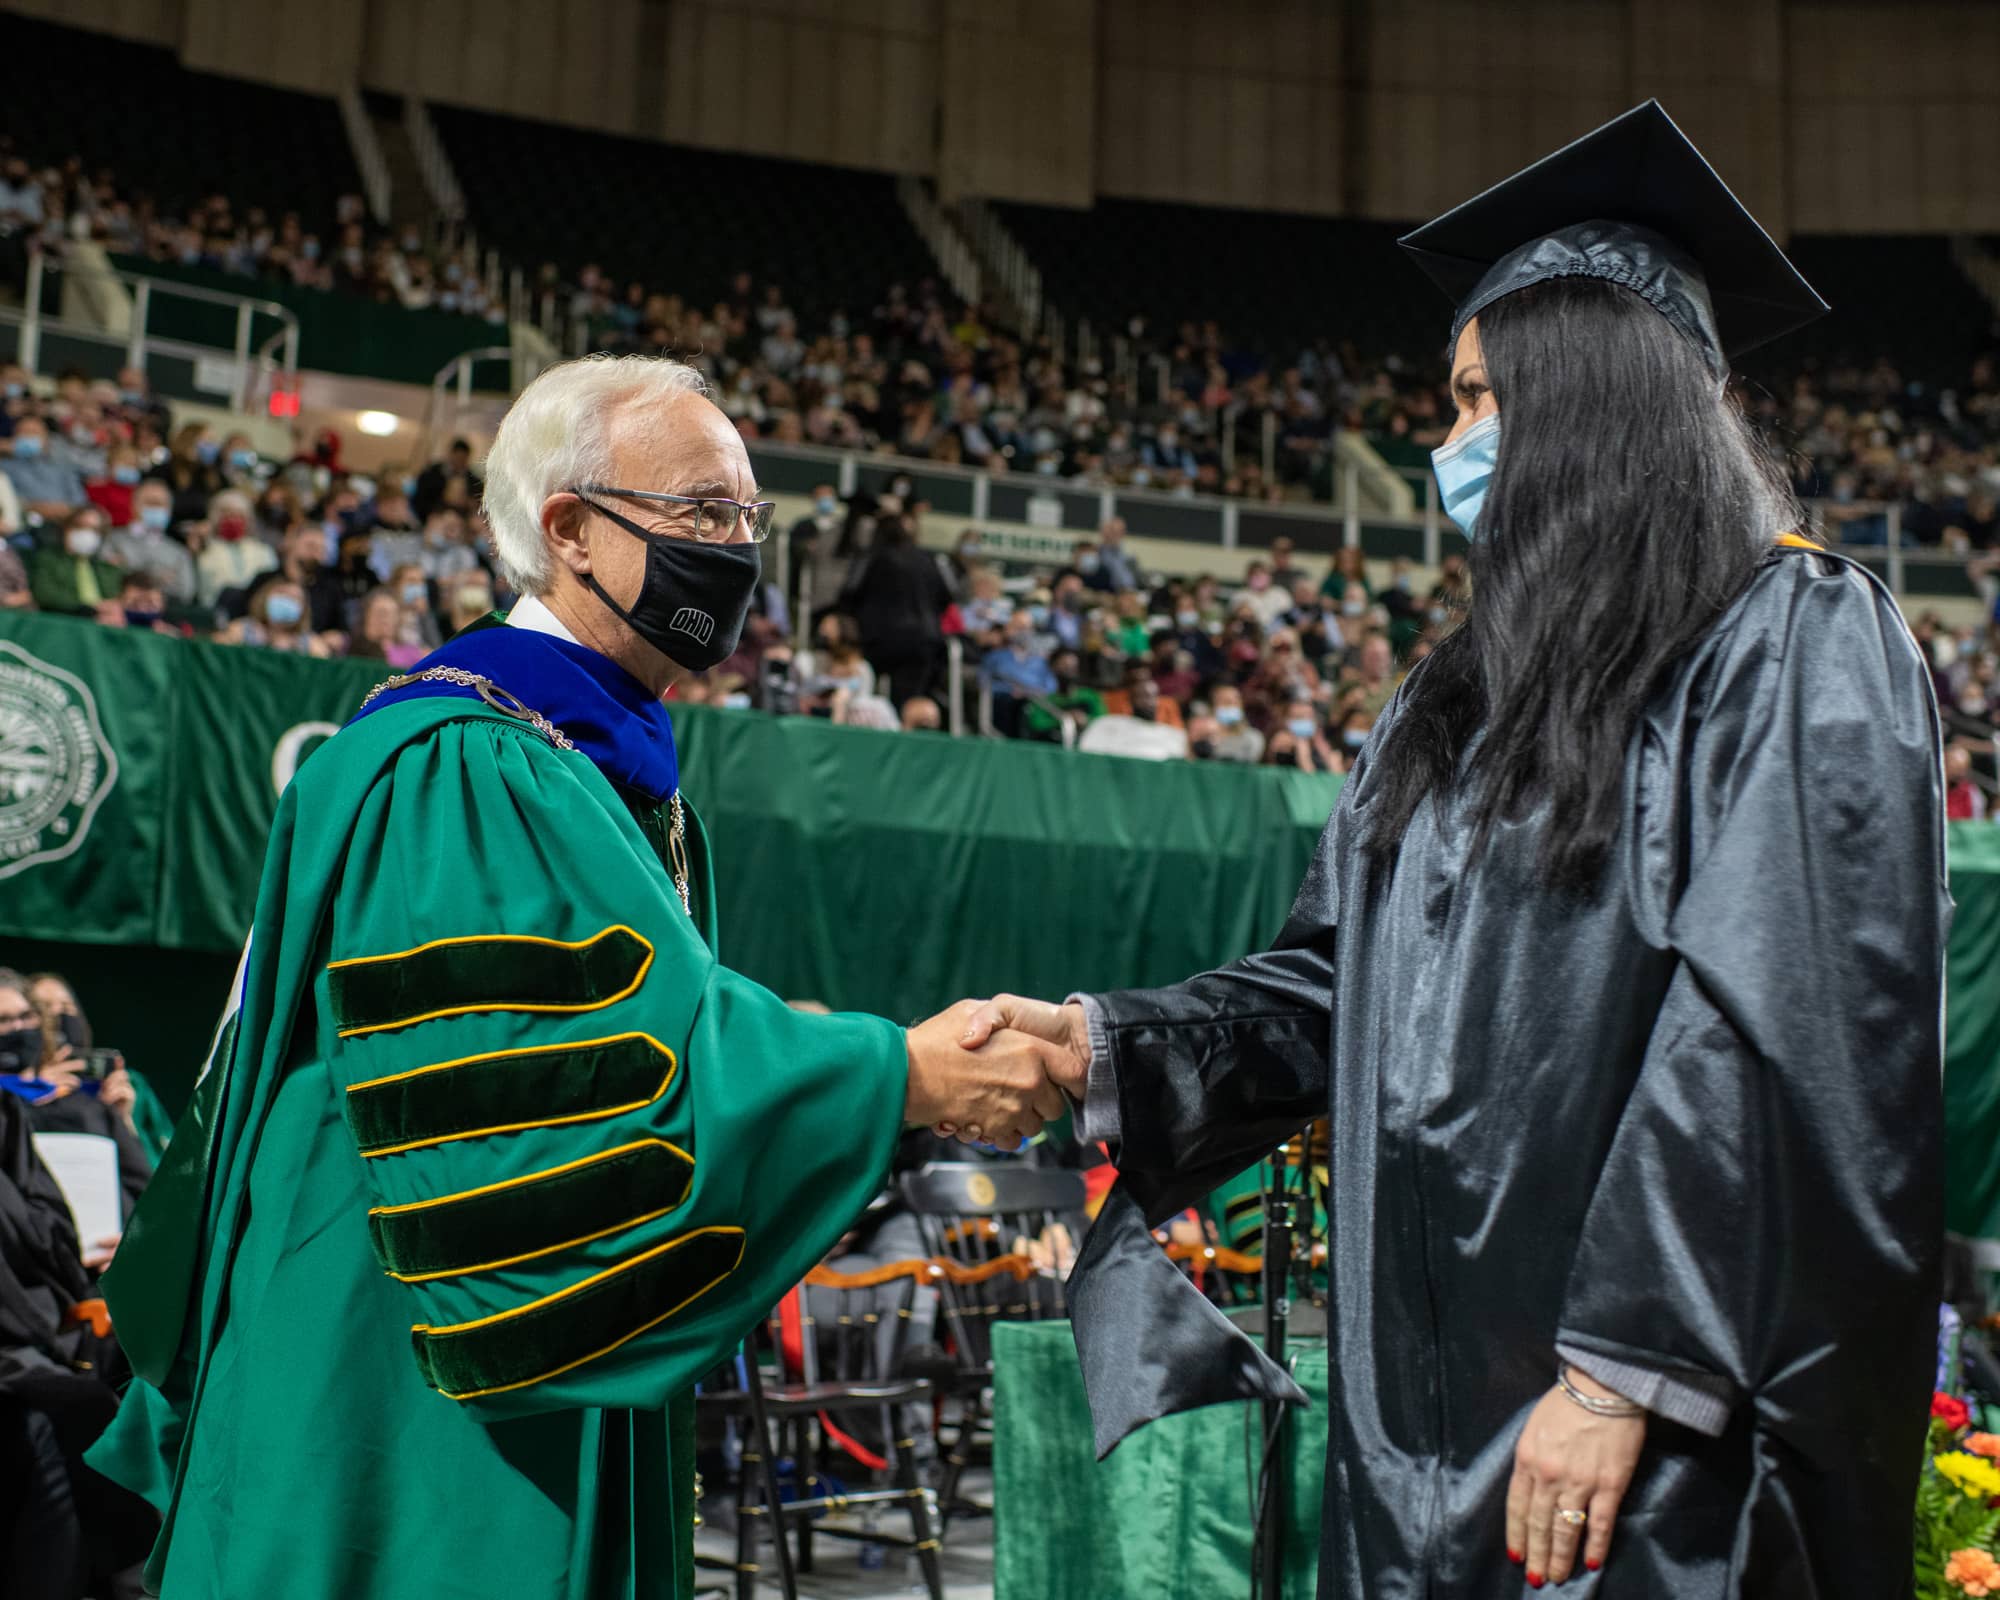 President Hugh Sherman congratulates a student during Fall Commencement 2021 at the Athens Campus.